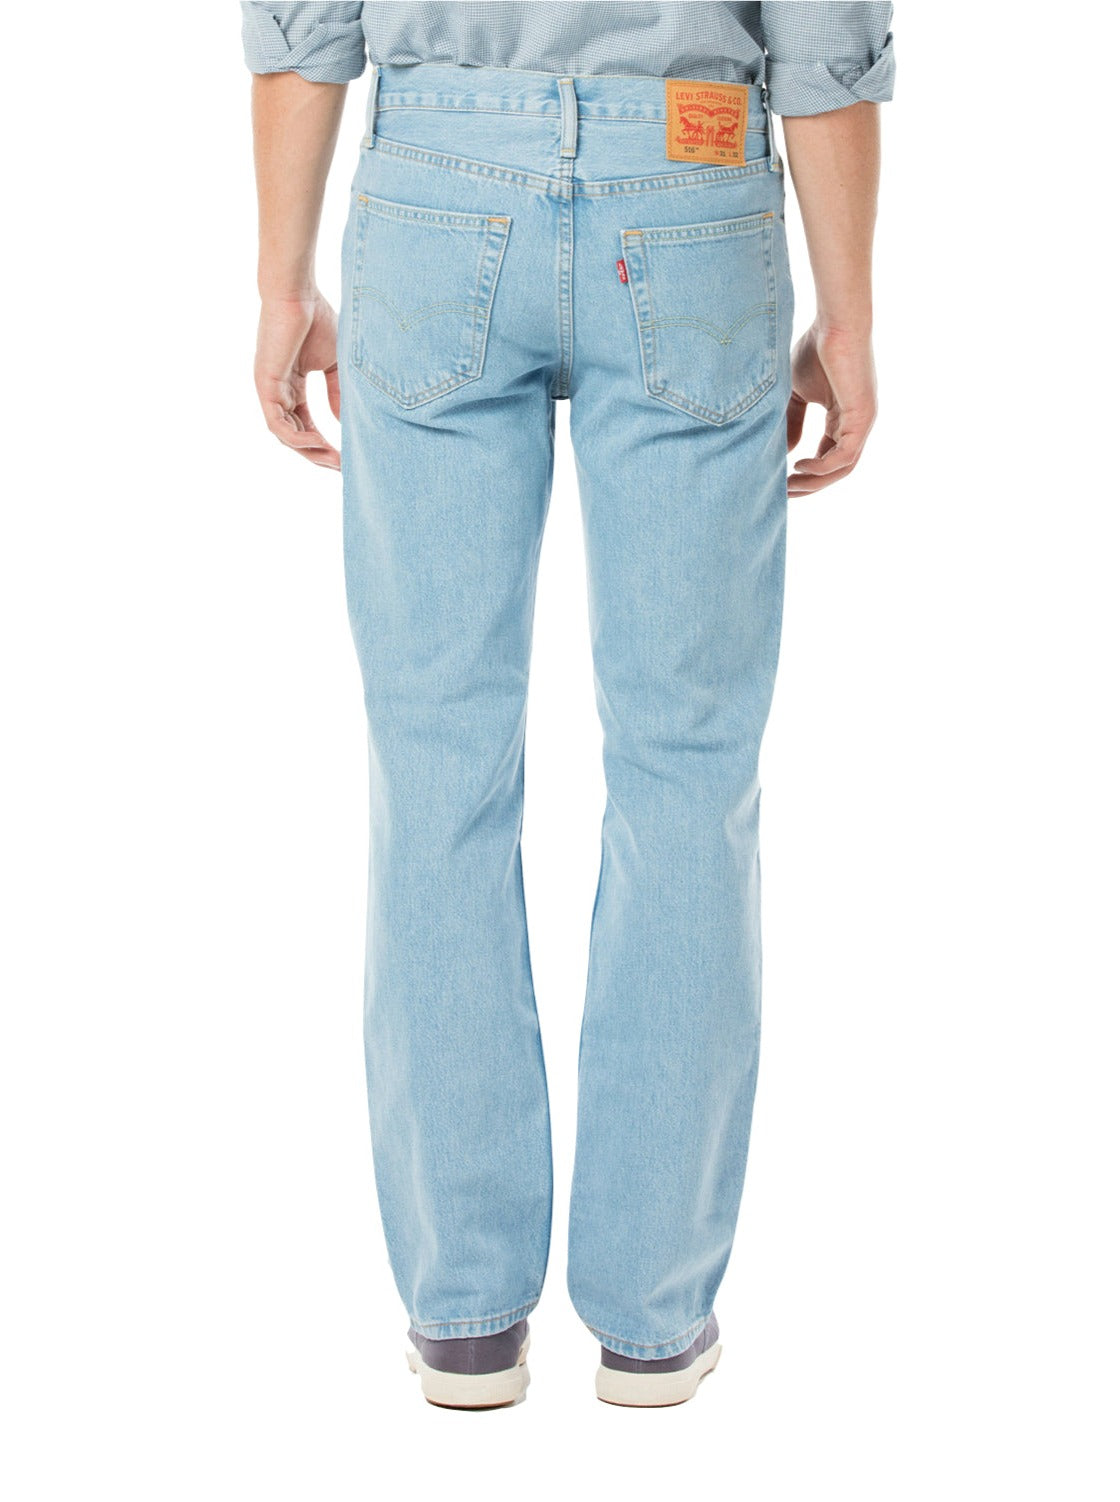 Levi's - 516 Straight Fit Jeans - Superwash – 88 Jeans